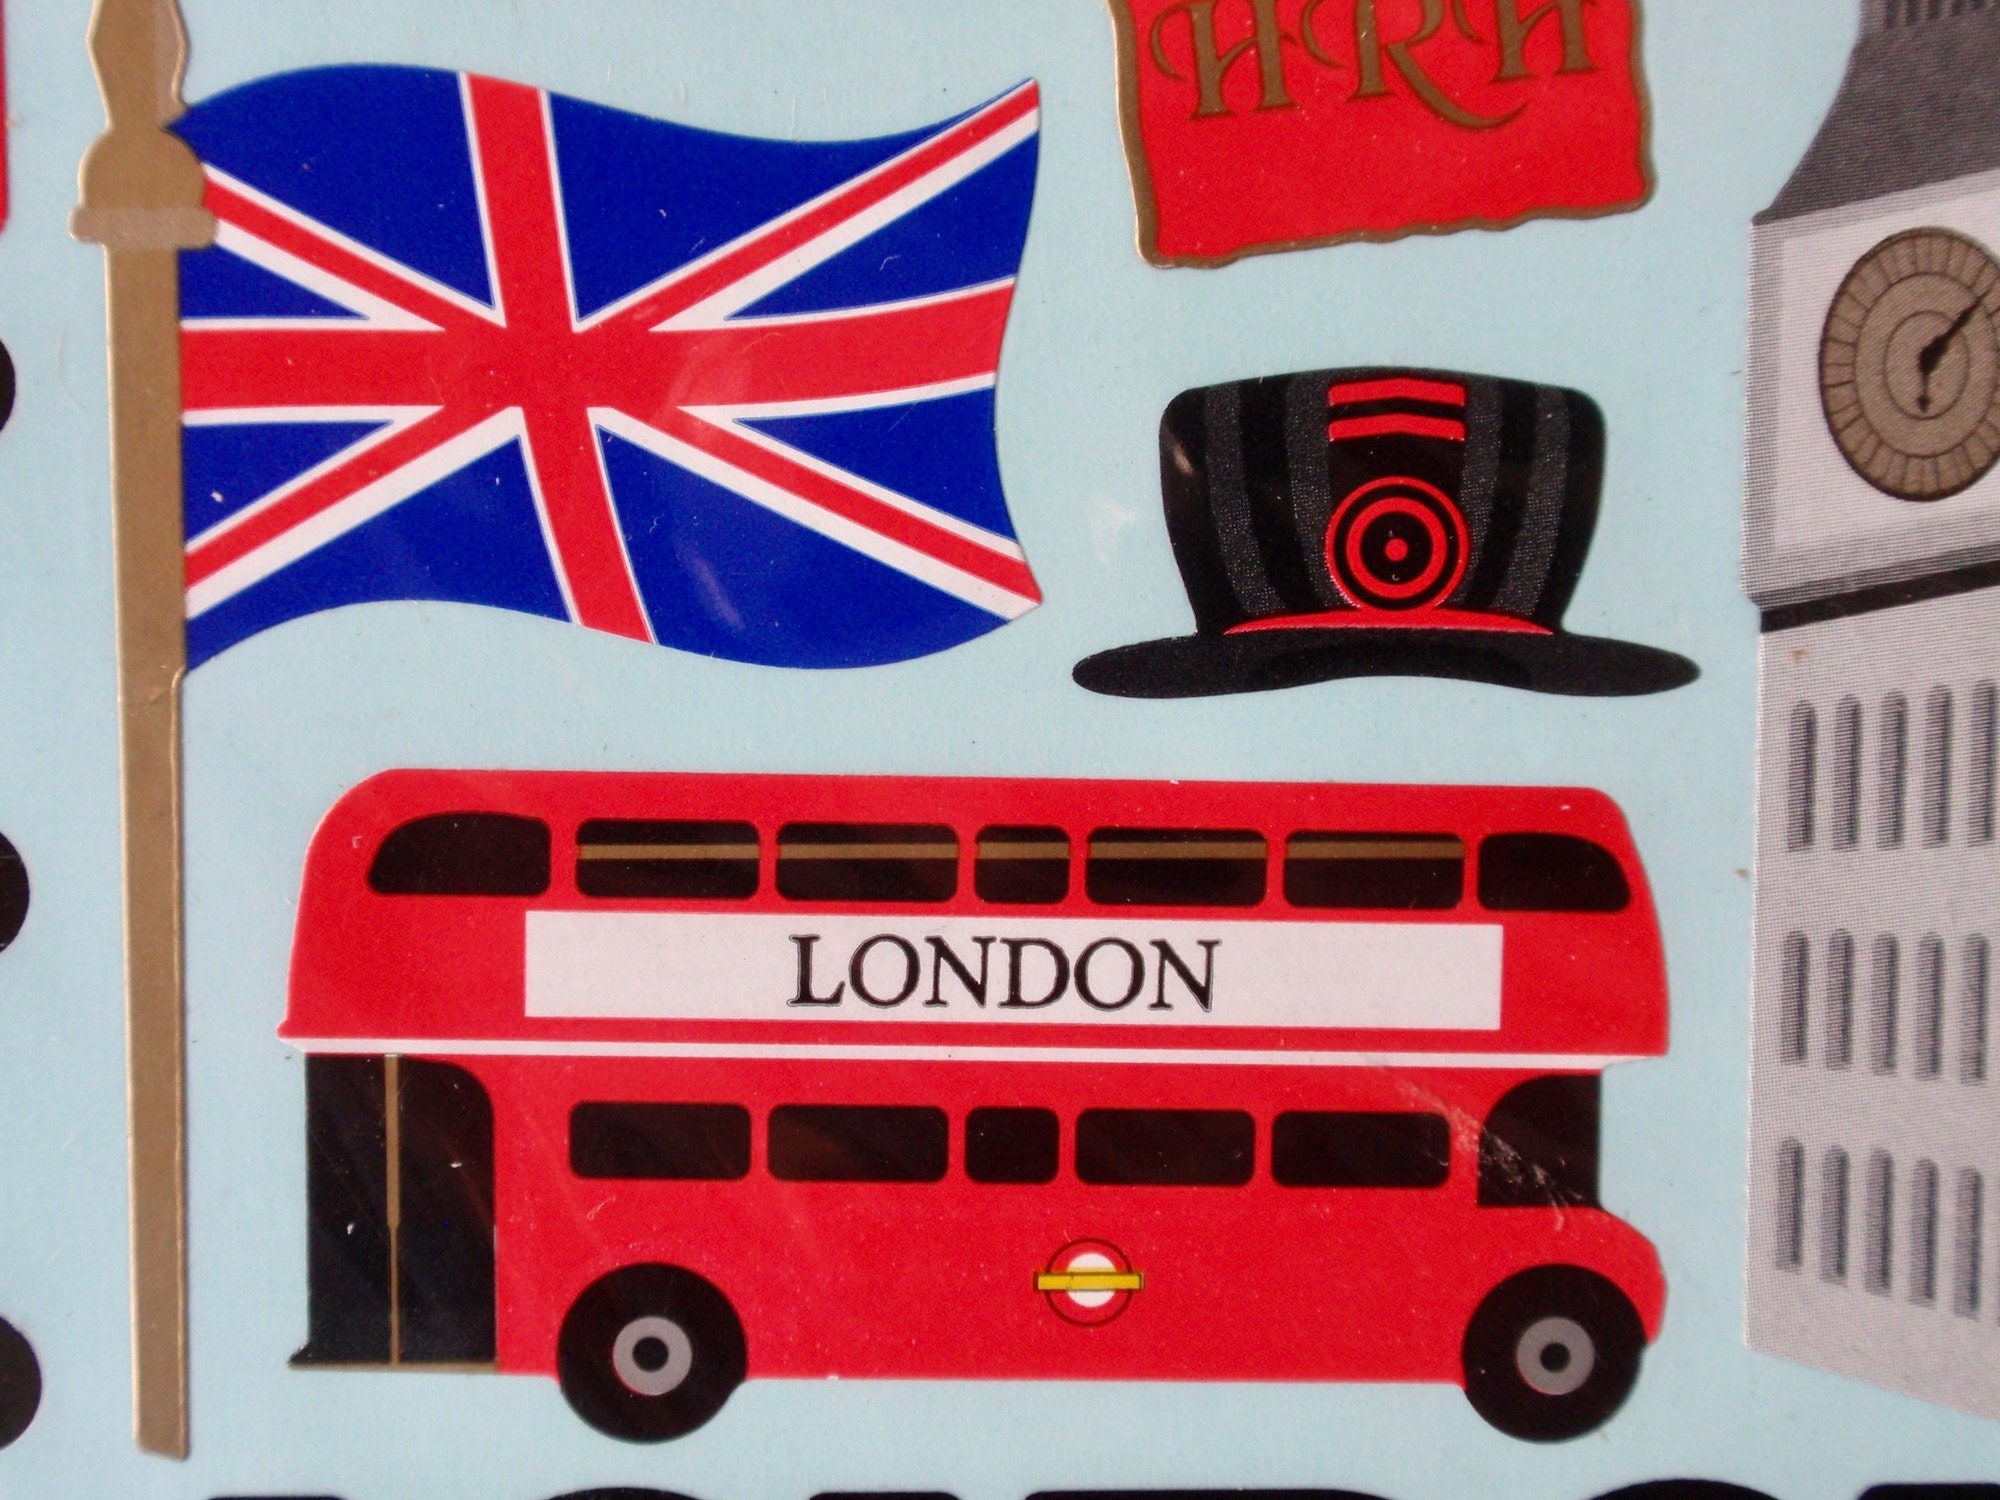 Set of 2 Sticker Packs, World Vacation Travel, London, Paris, USA, Unopened  Out of Print, Scrapbook, Cards, Posters, Mix Media Art, Craft 